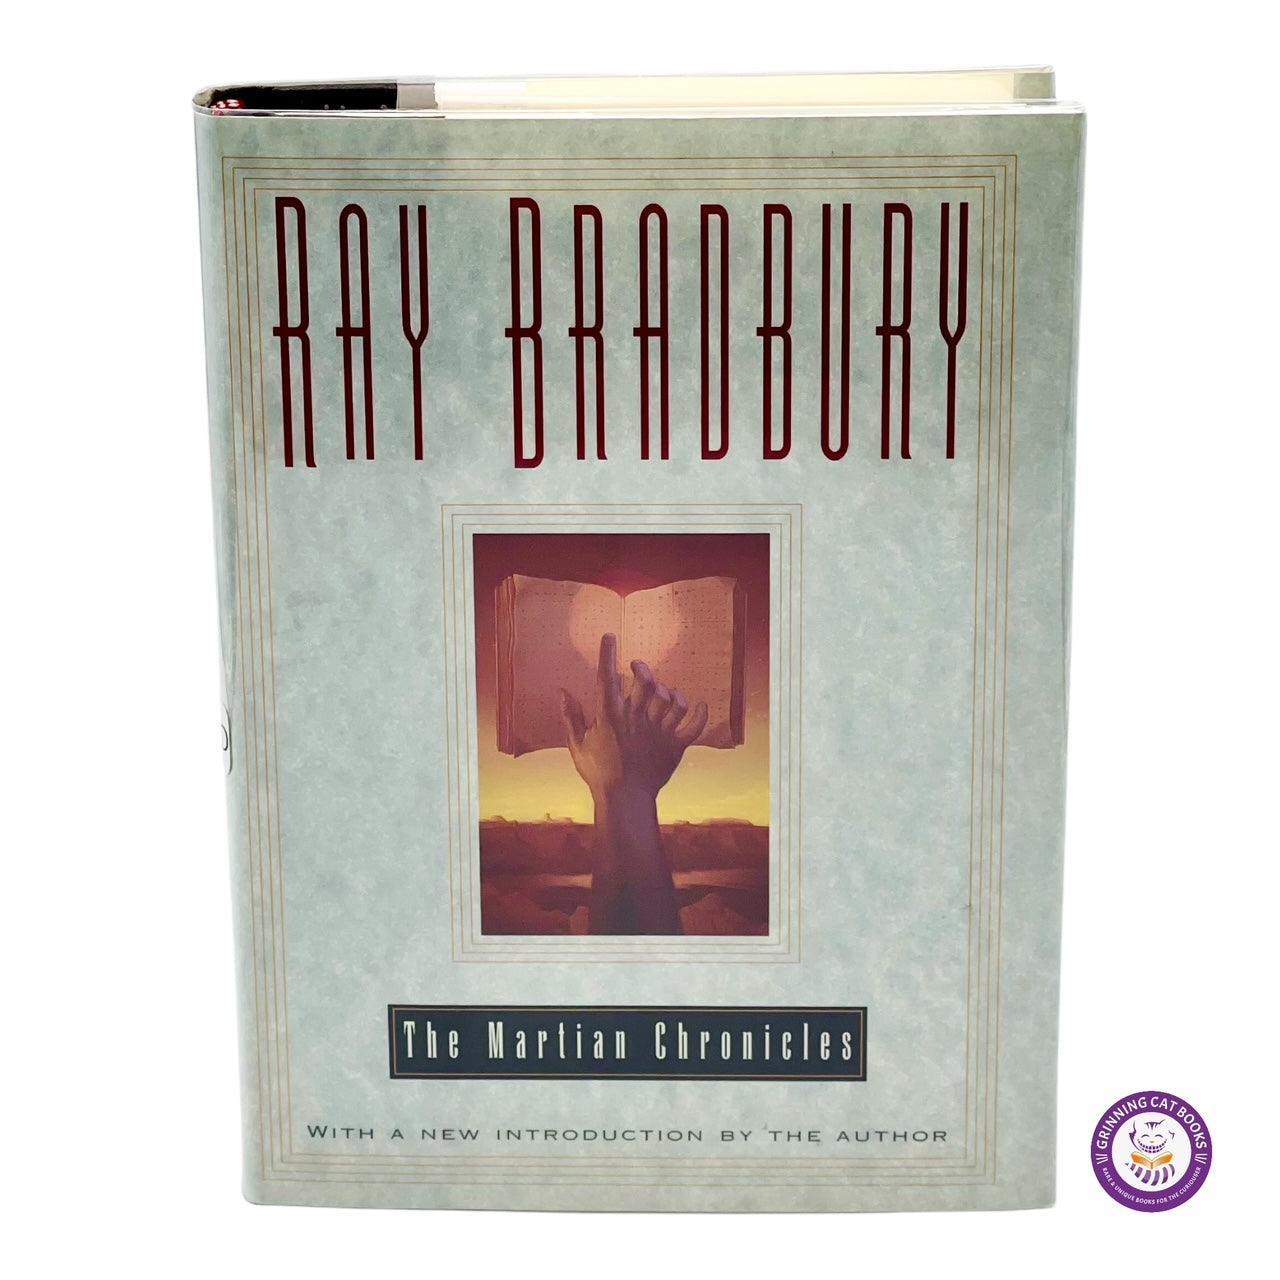 The Martian Chronicles (signed by Ray Bradbury) - Grinning Cat Books - SCIENCE FICTION - SCIENCE FICTION, SIGNED